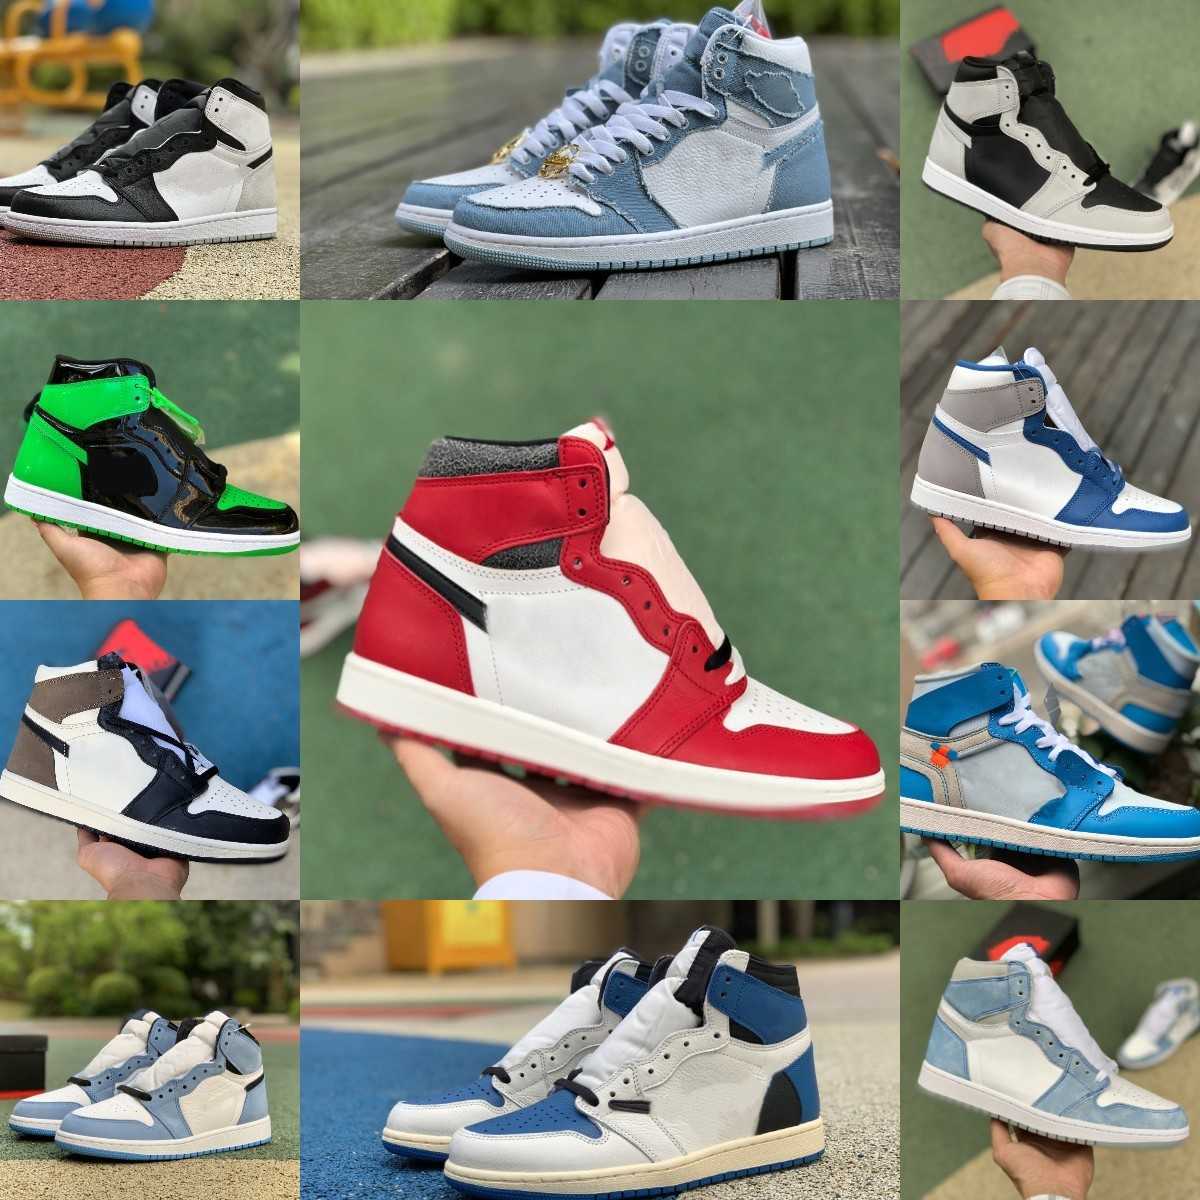 

Chicago Lost Found Jumpman 1 1s Basketball Shoes True Turbo Blue Pine Green Gorge Denim Visionaire Hyper Royal Bio Hack TWIST Atmosphere Designer Sports Sneakers S5, Please contact us